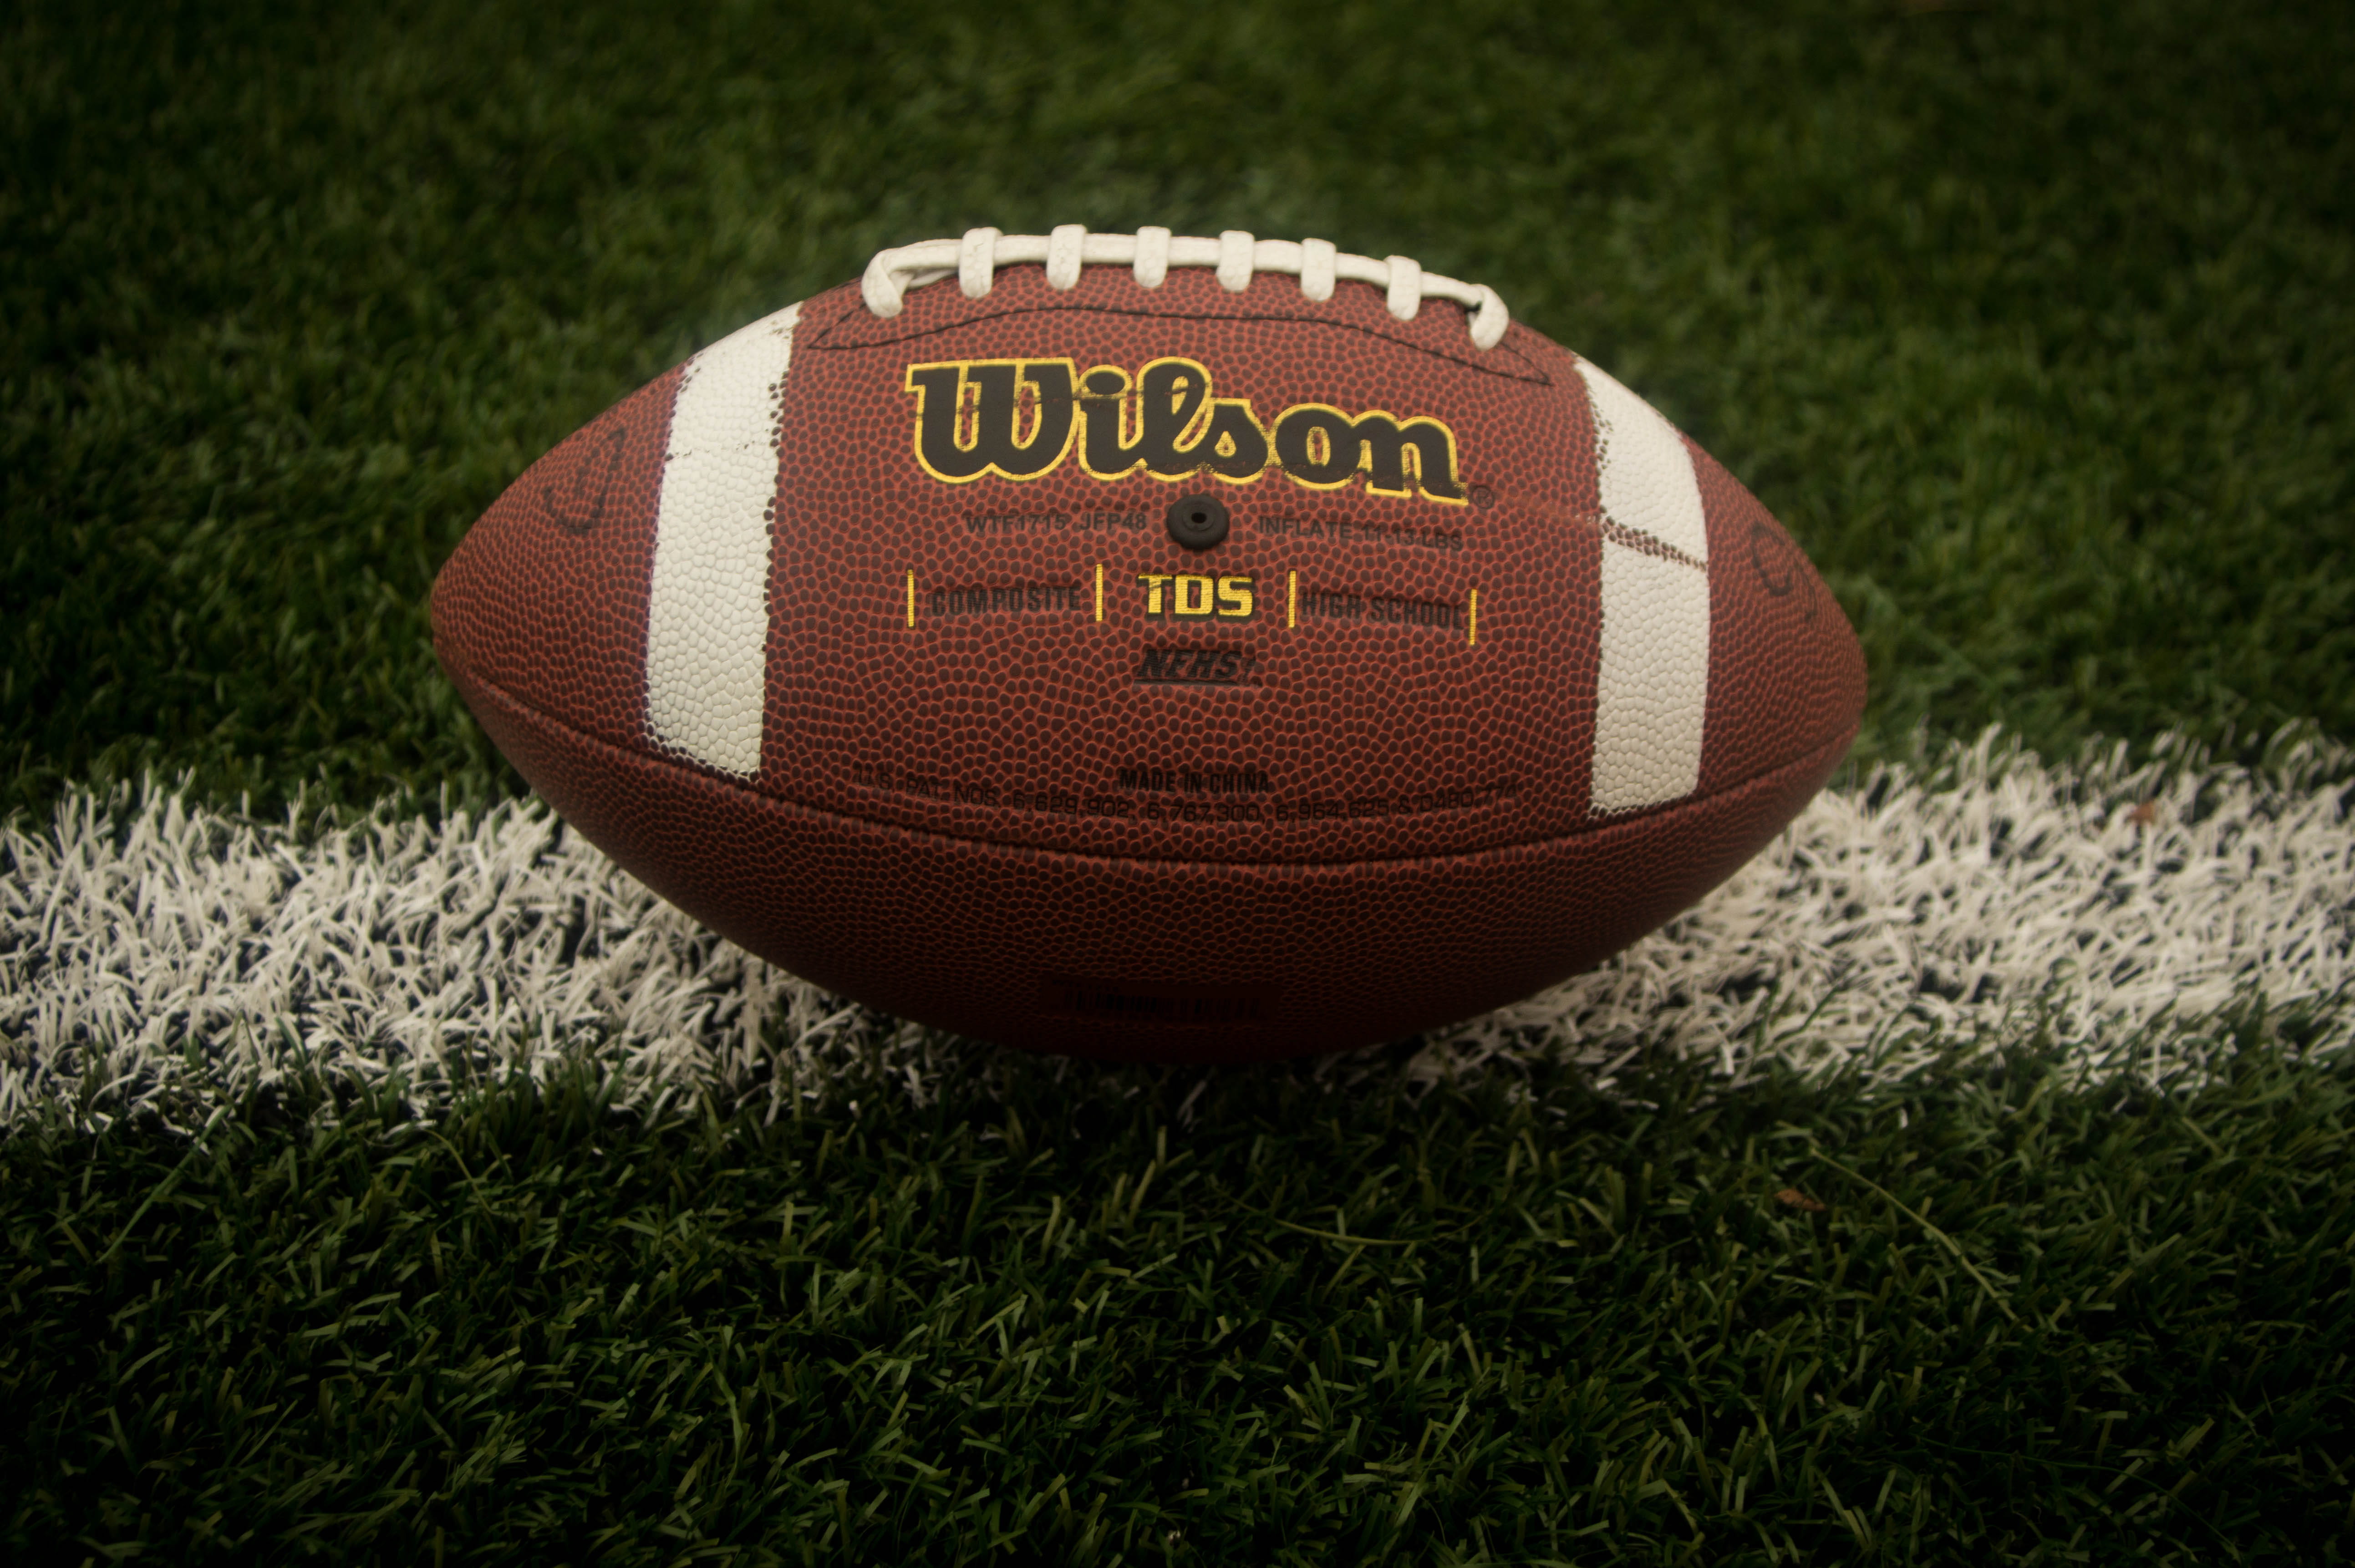 This picture shows an american football manufactured by Wilson lying on a football field. The football has the typical brown and redish color with some white lines painted on it and white laces on the top.